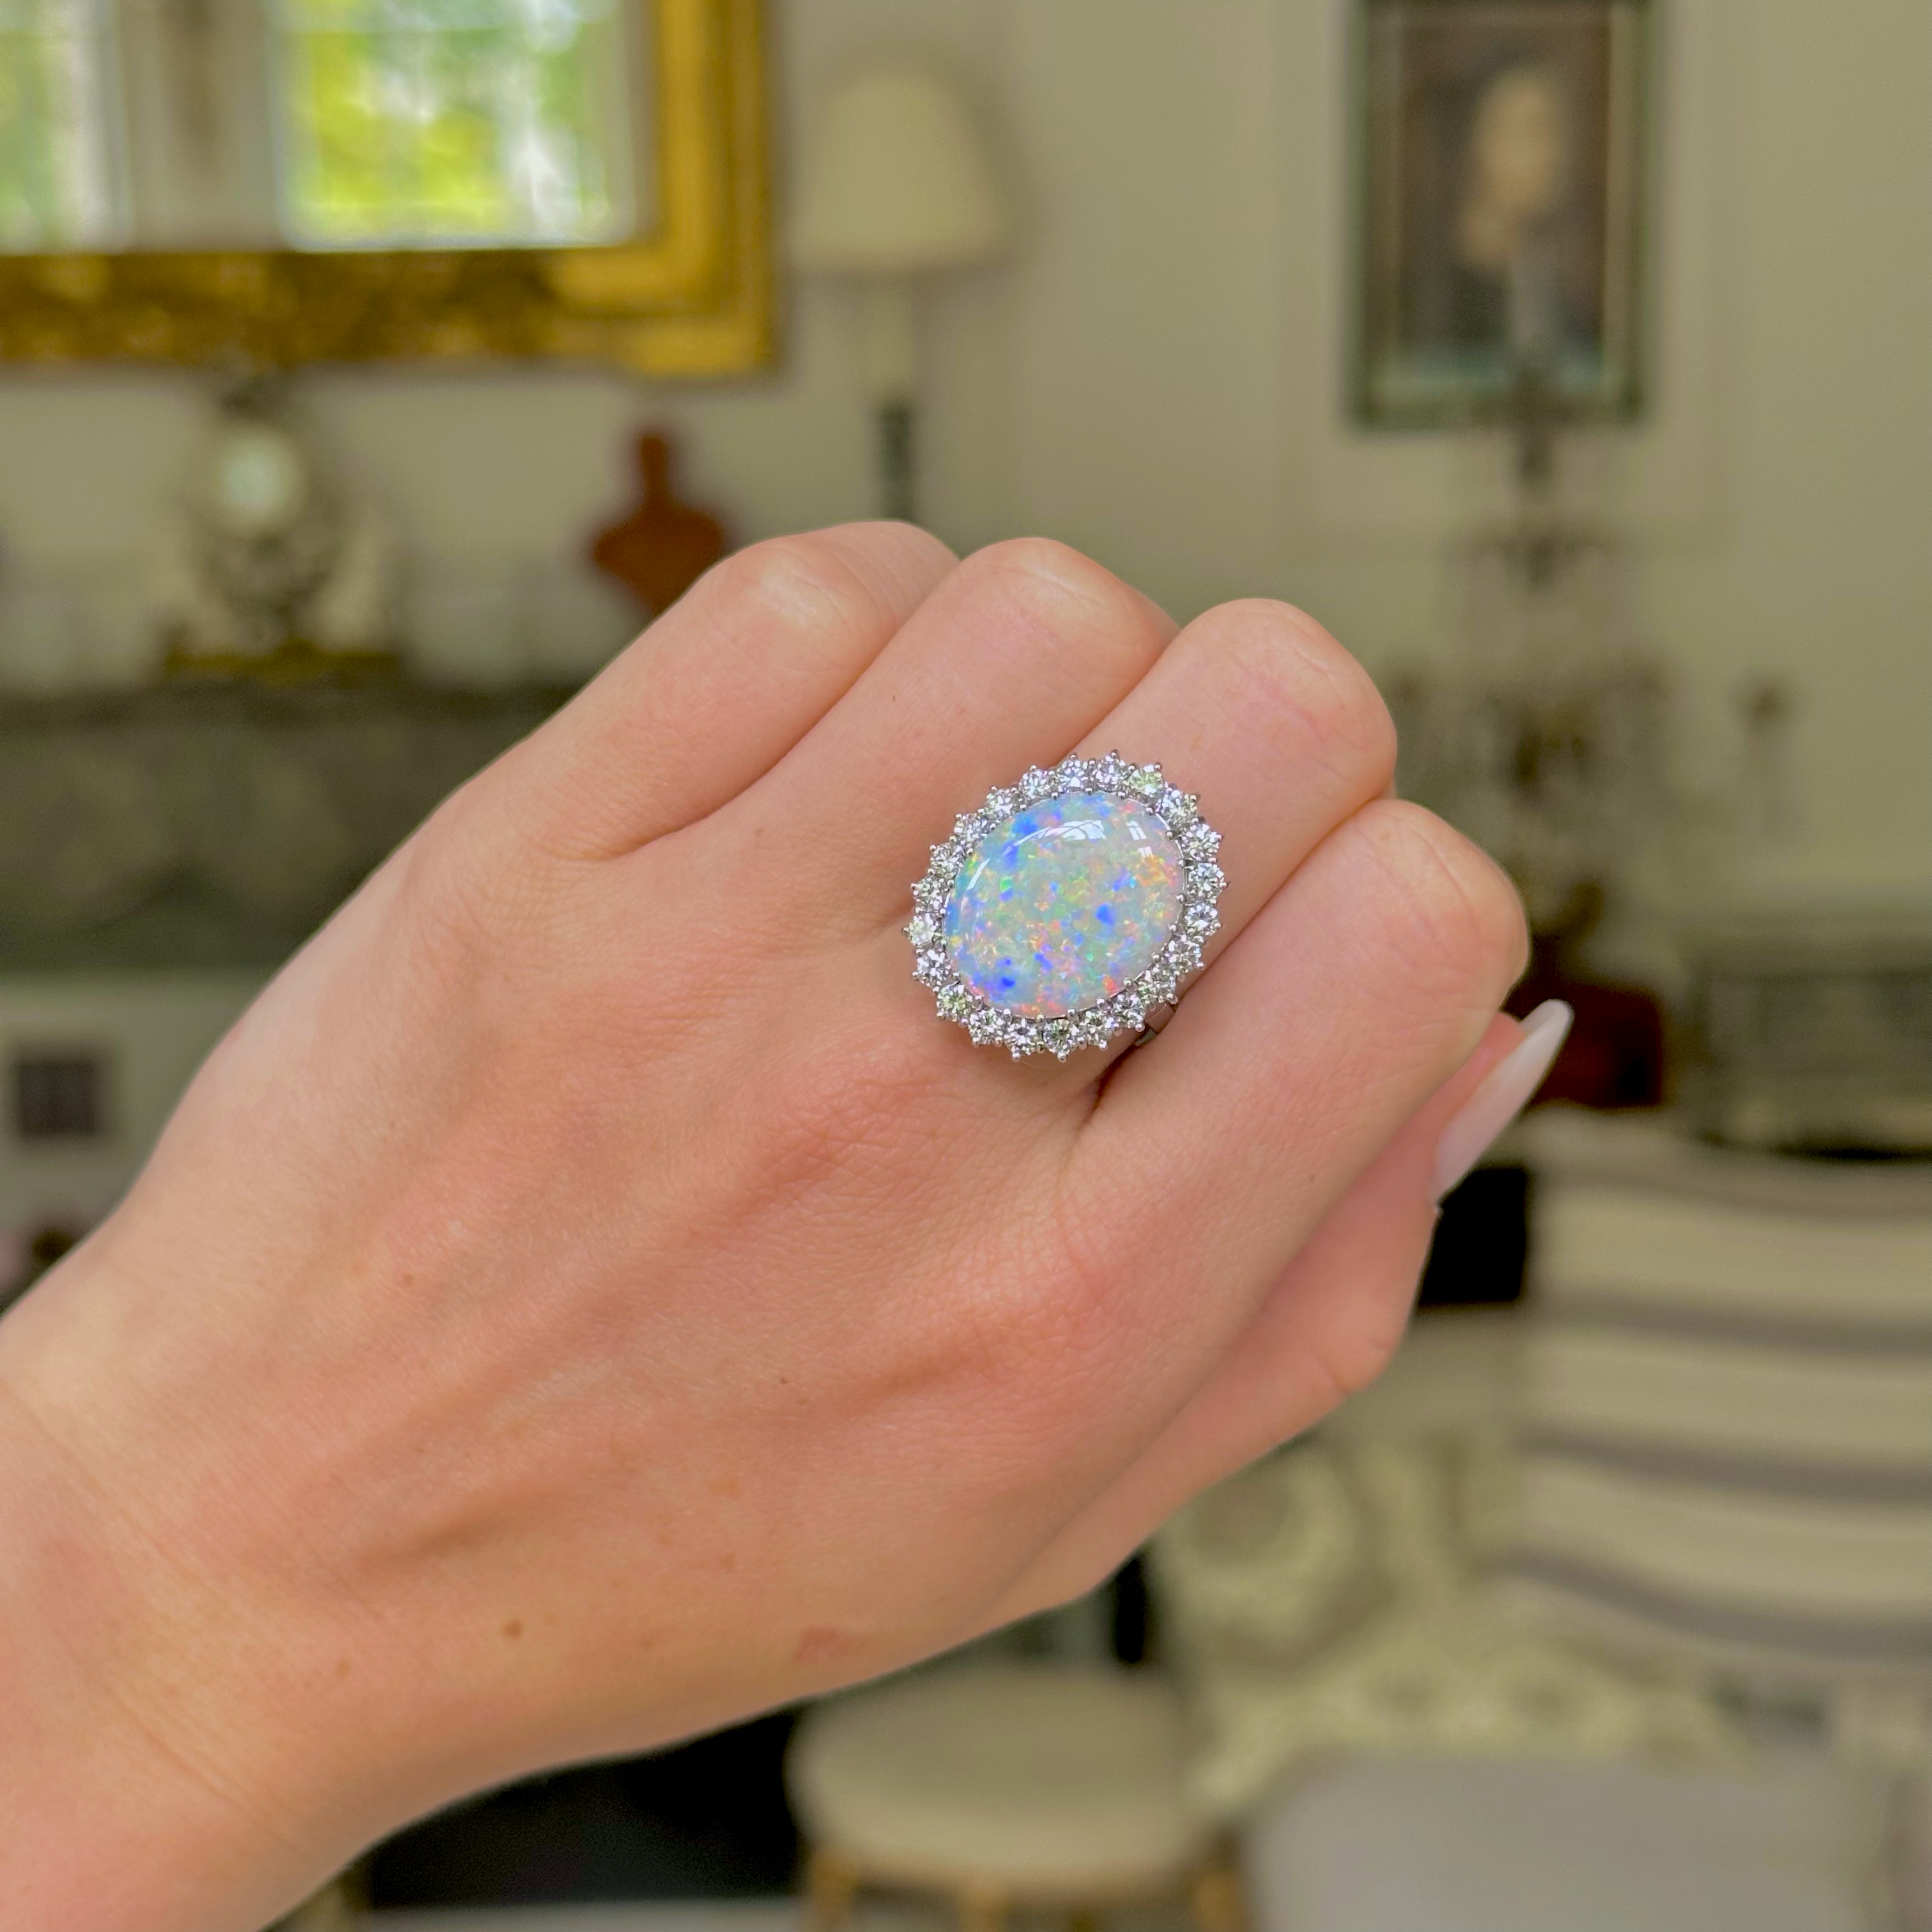 Buy Opal Engagement Ring / Opal Wedding Ring / Vintage Natural Opal Ring  Cushion Cut Opal Halo Ring Opal Rings for Women Bridal Anniversary Gift  Online in India - Etsy